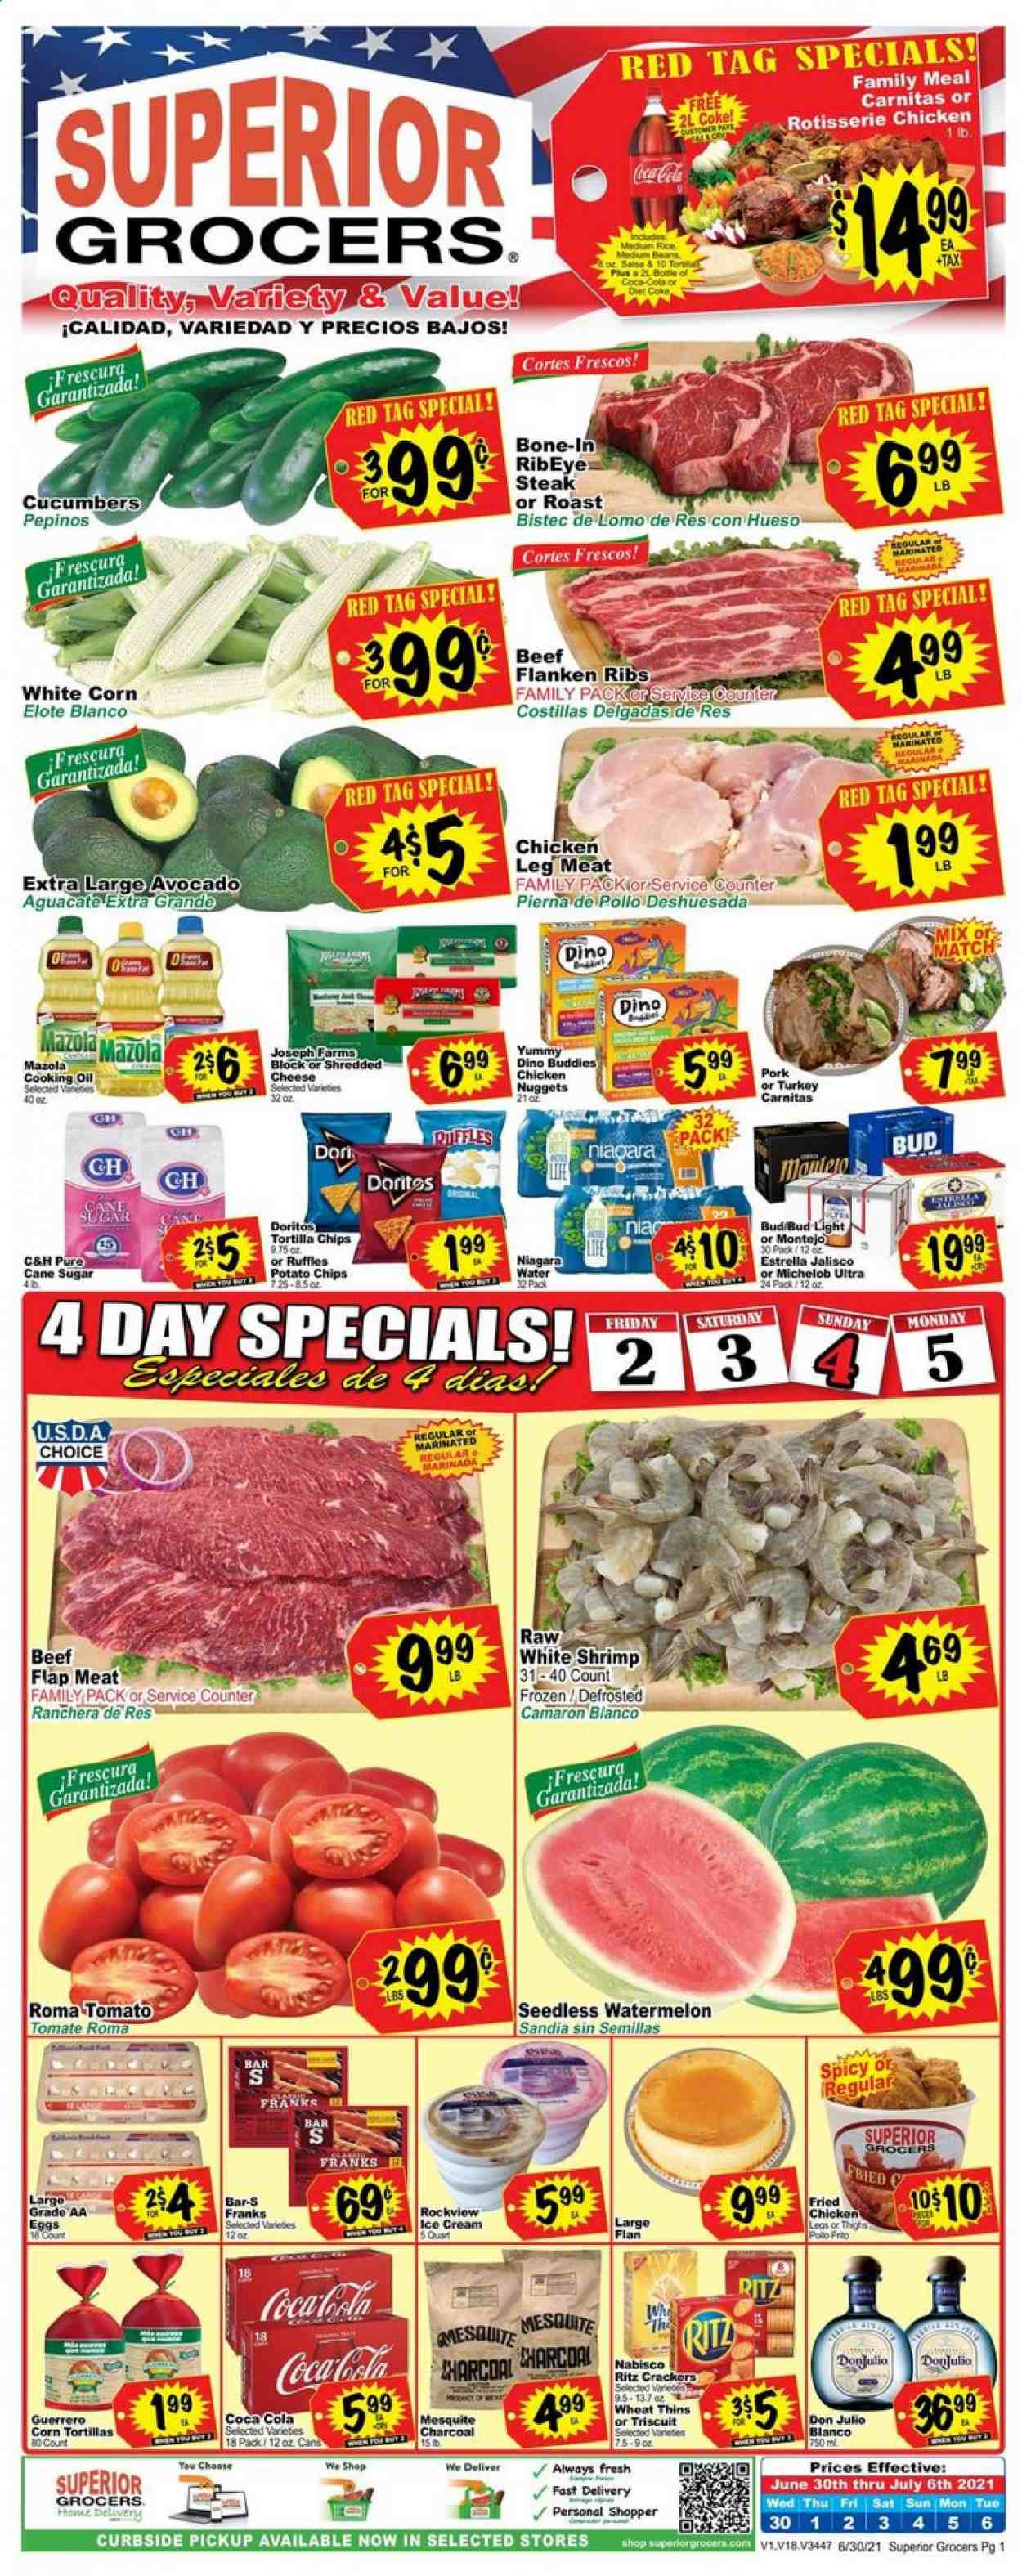 thumbnail - Superior Grocers Flyer - 06/30/2021 - 07/06/2021 - Sales products - Michelob, corn tortillas, beans, cucumber, tomatoes, avocado, watermelon, beef meat, beef steak, steak, bone-in ribeye, ribeye steak, shrimps, chicken roast, nuggets, fried chicken, chicken nuggets, Yummy Dino Buddies, shredded cheese, eggs, ice cream, crackers, RITZ, Doritos, tortilla chips, potato chips, chips, Thins, Ruffles, cane sugar, sugar, salsa, oil, Coca-Cola, beer, Bud Light. Page 1.